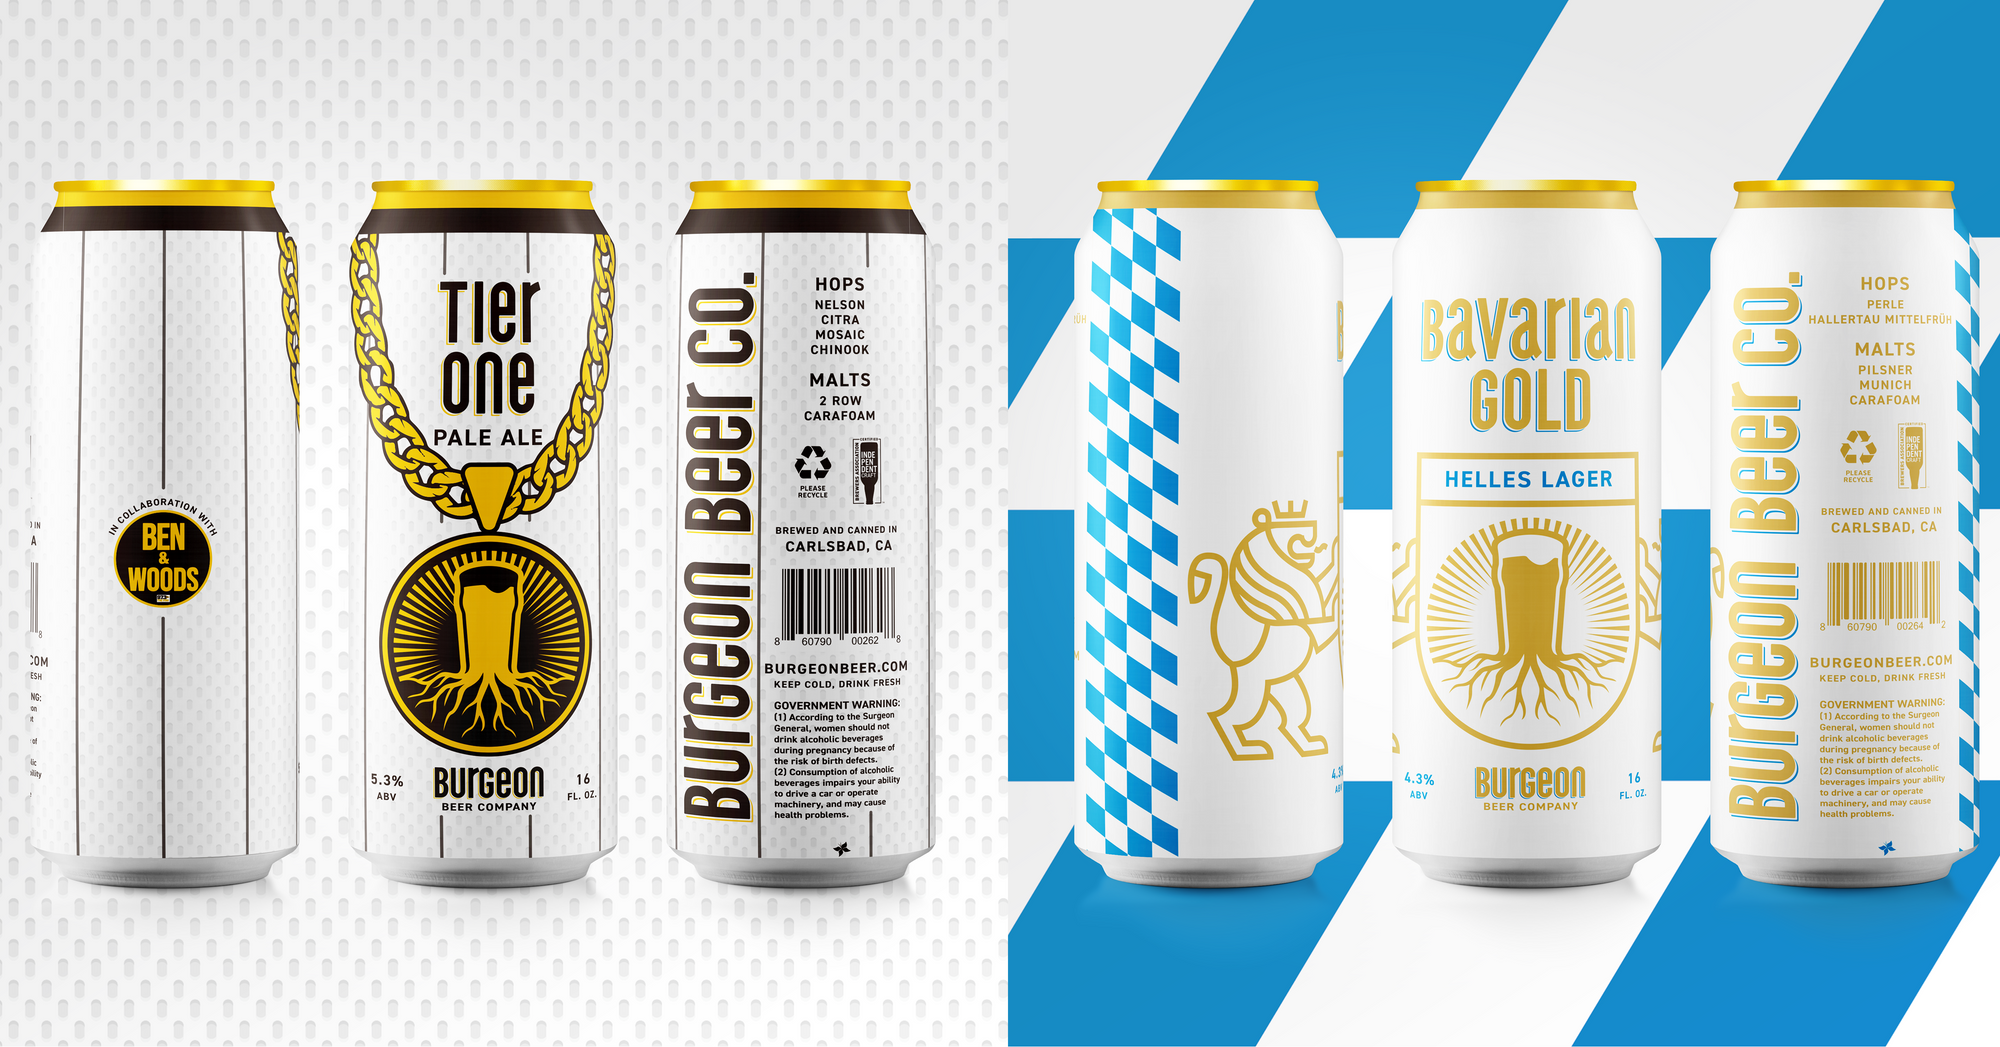 Double Can Release: Tier One Pale Ale (Collab with Ben and Woods) & Bavarian Gold Helles Lager